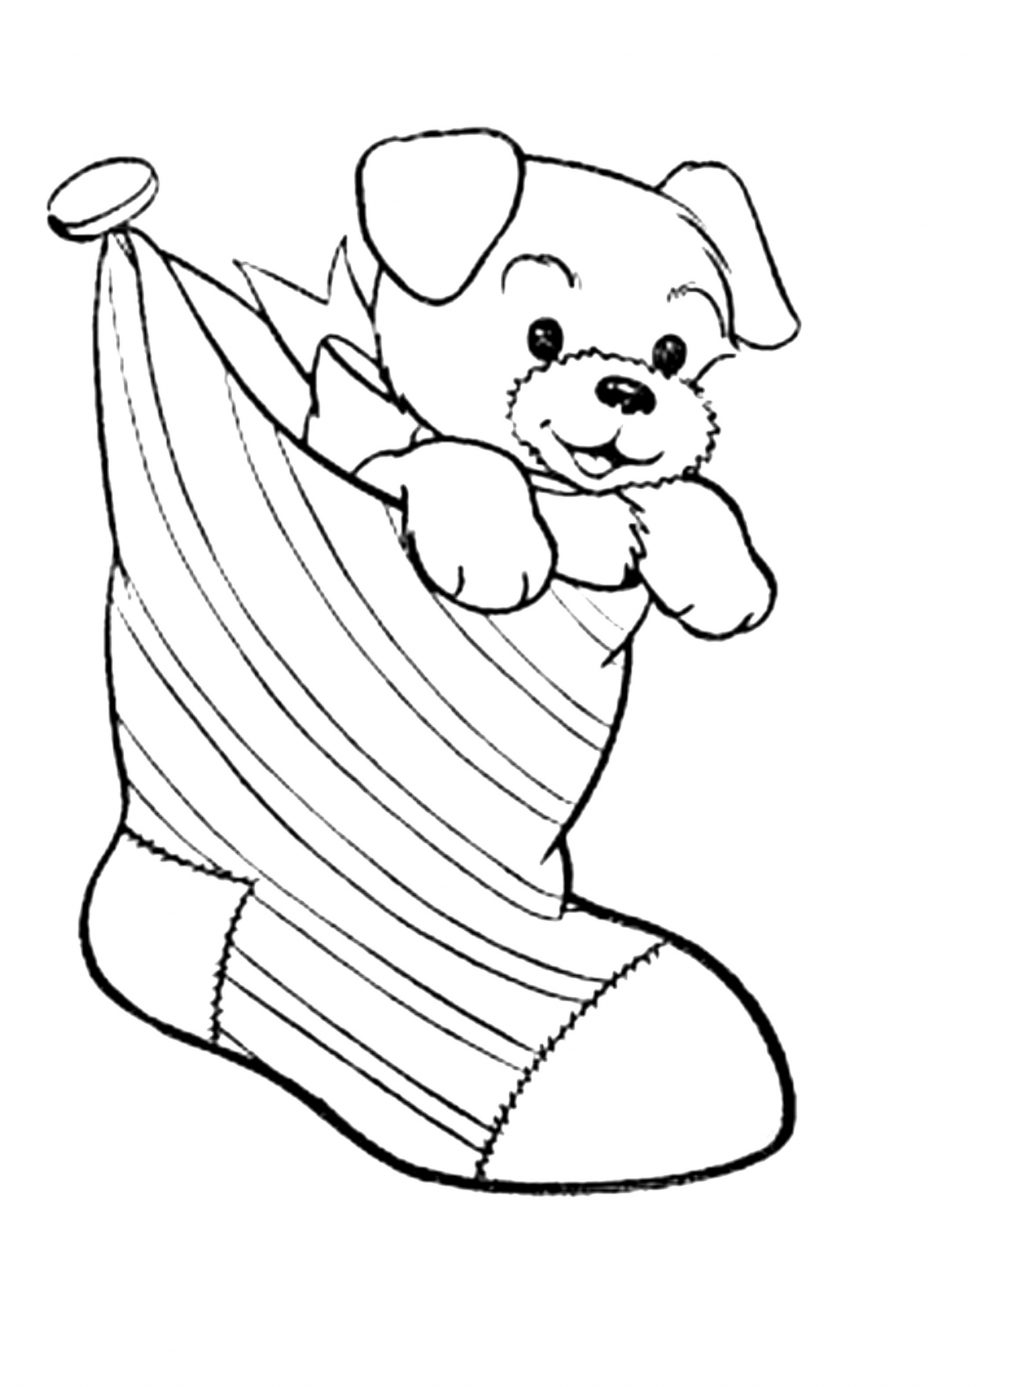 Little Puppy Coloring Pages Coloring Page Coloring Page Cute Puppy Pages Top Free Printable